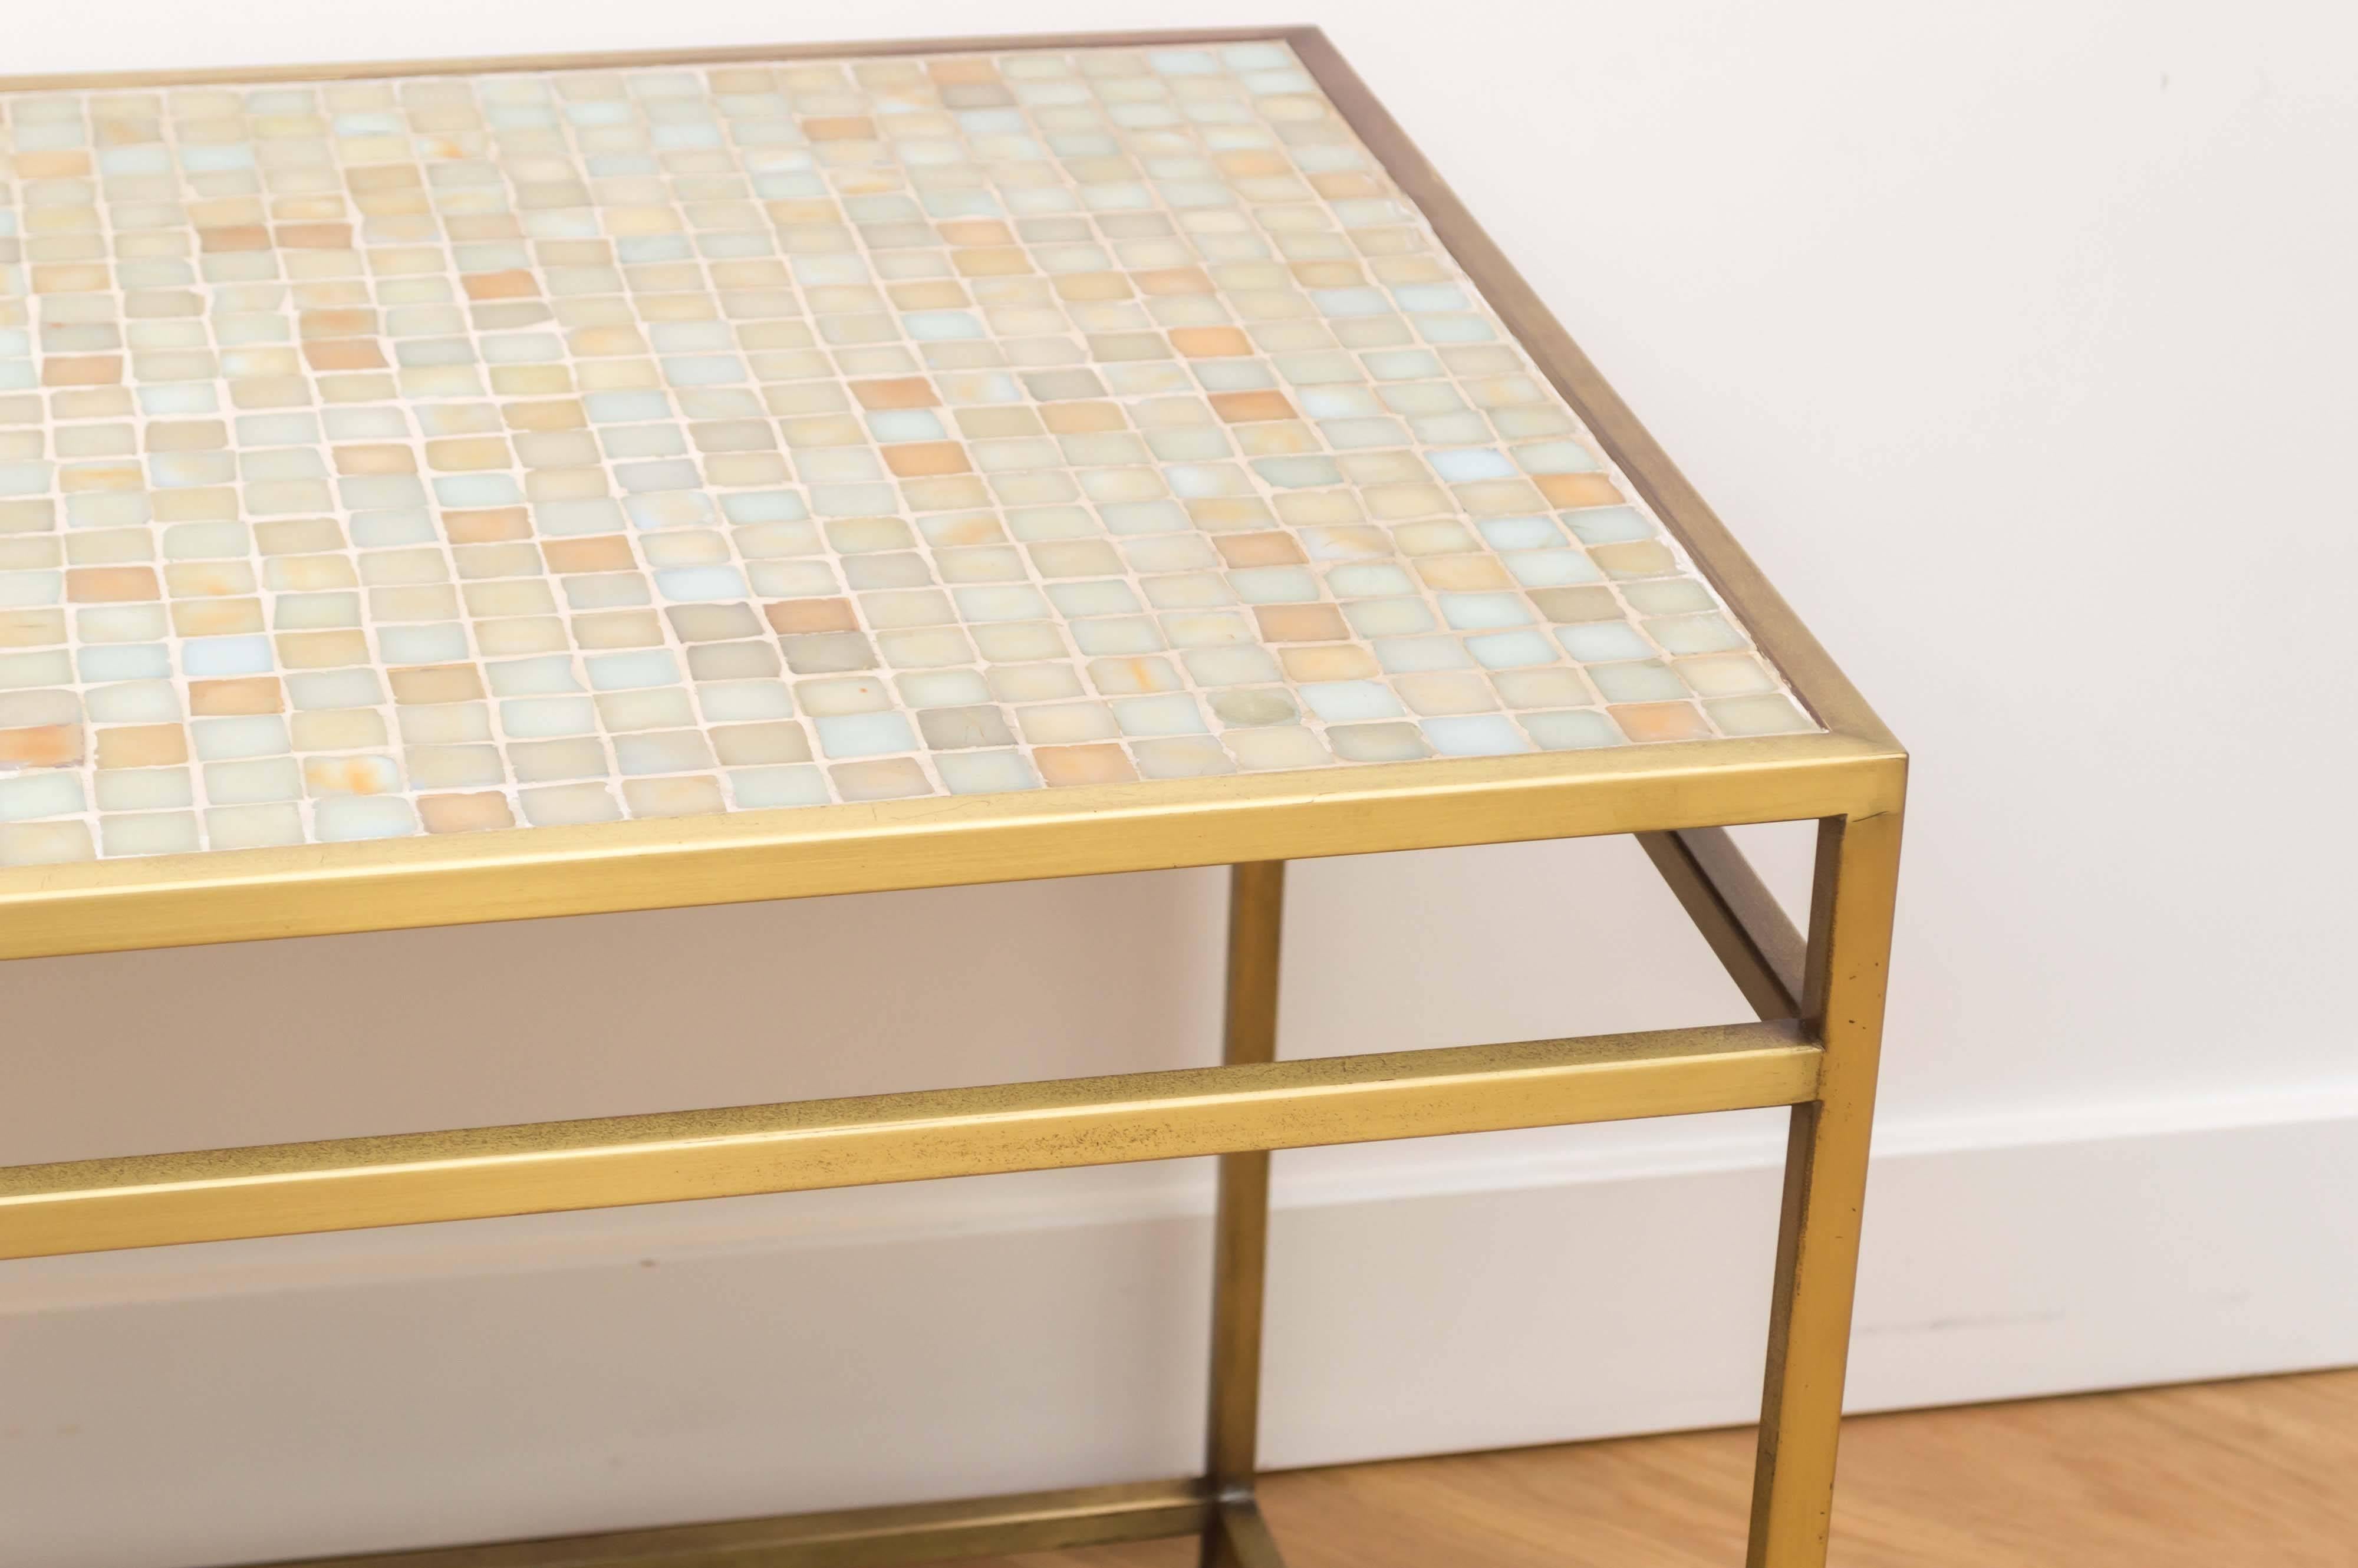 Brass Tile-Top Console Table In Excellent Condition For Sale In San Francisco, CA